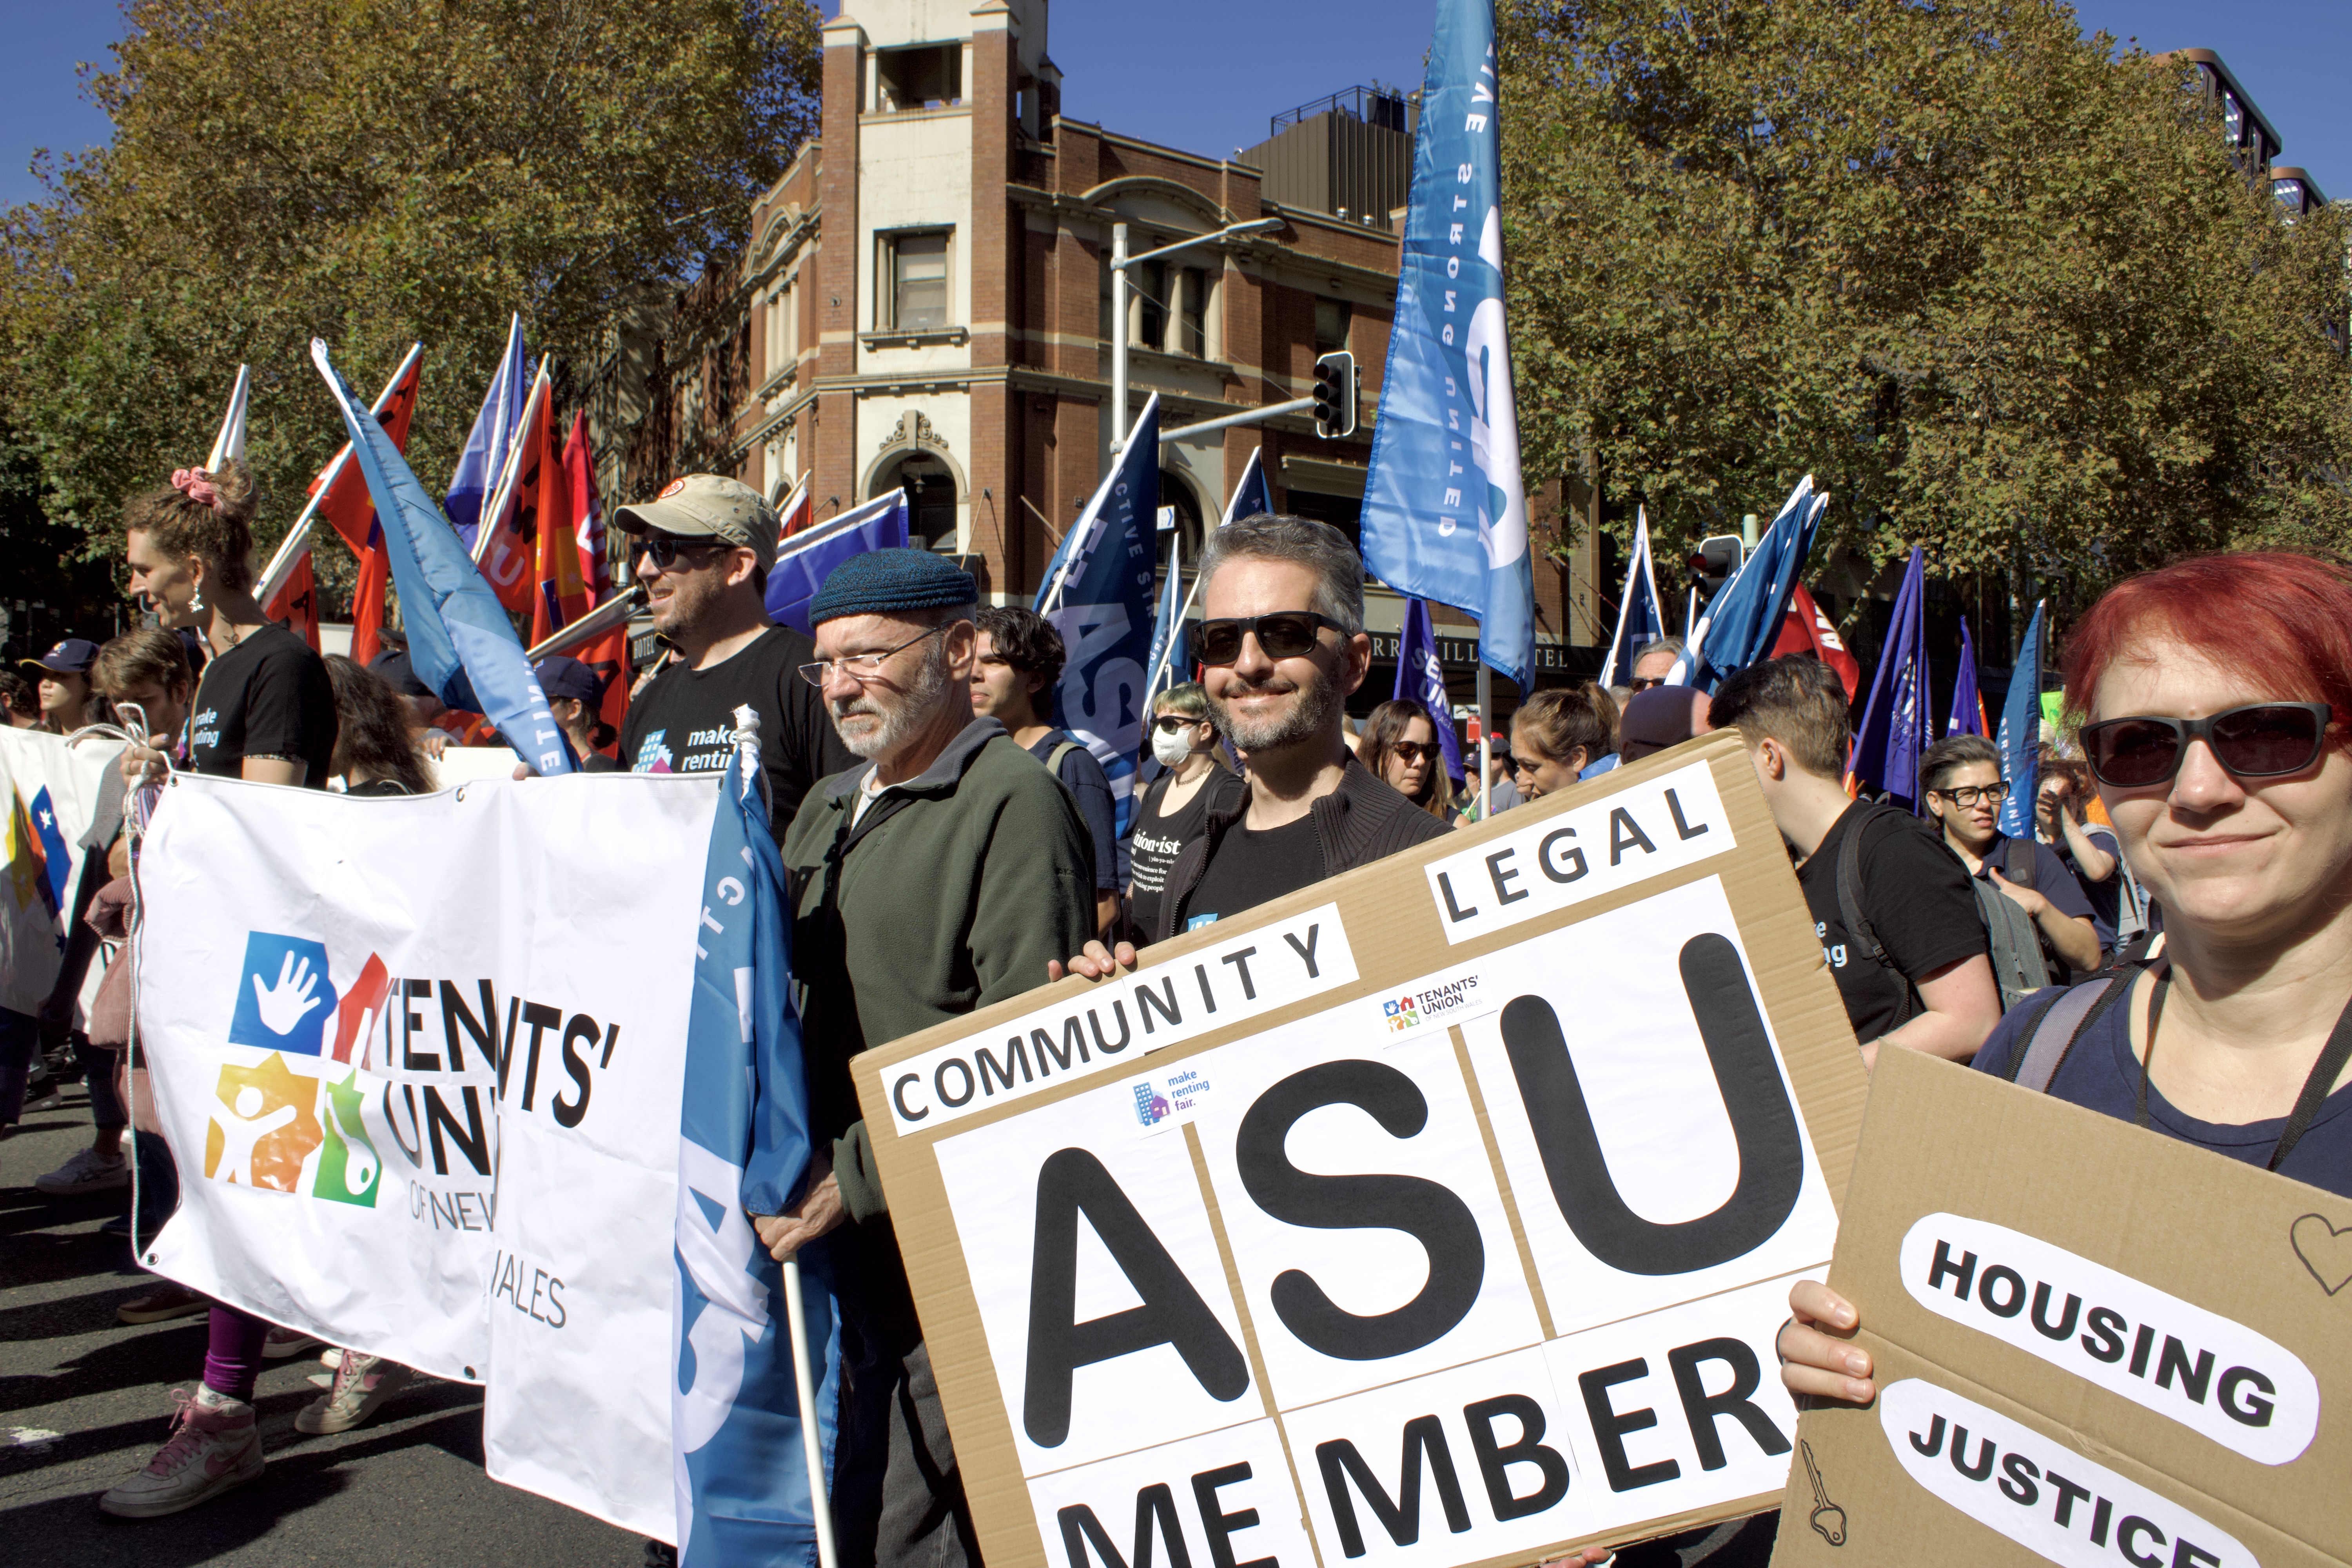 Tenants' Union staff members holding placards and marching. One placard reads Community Legal Members ASU (Australian Services Union).